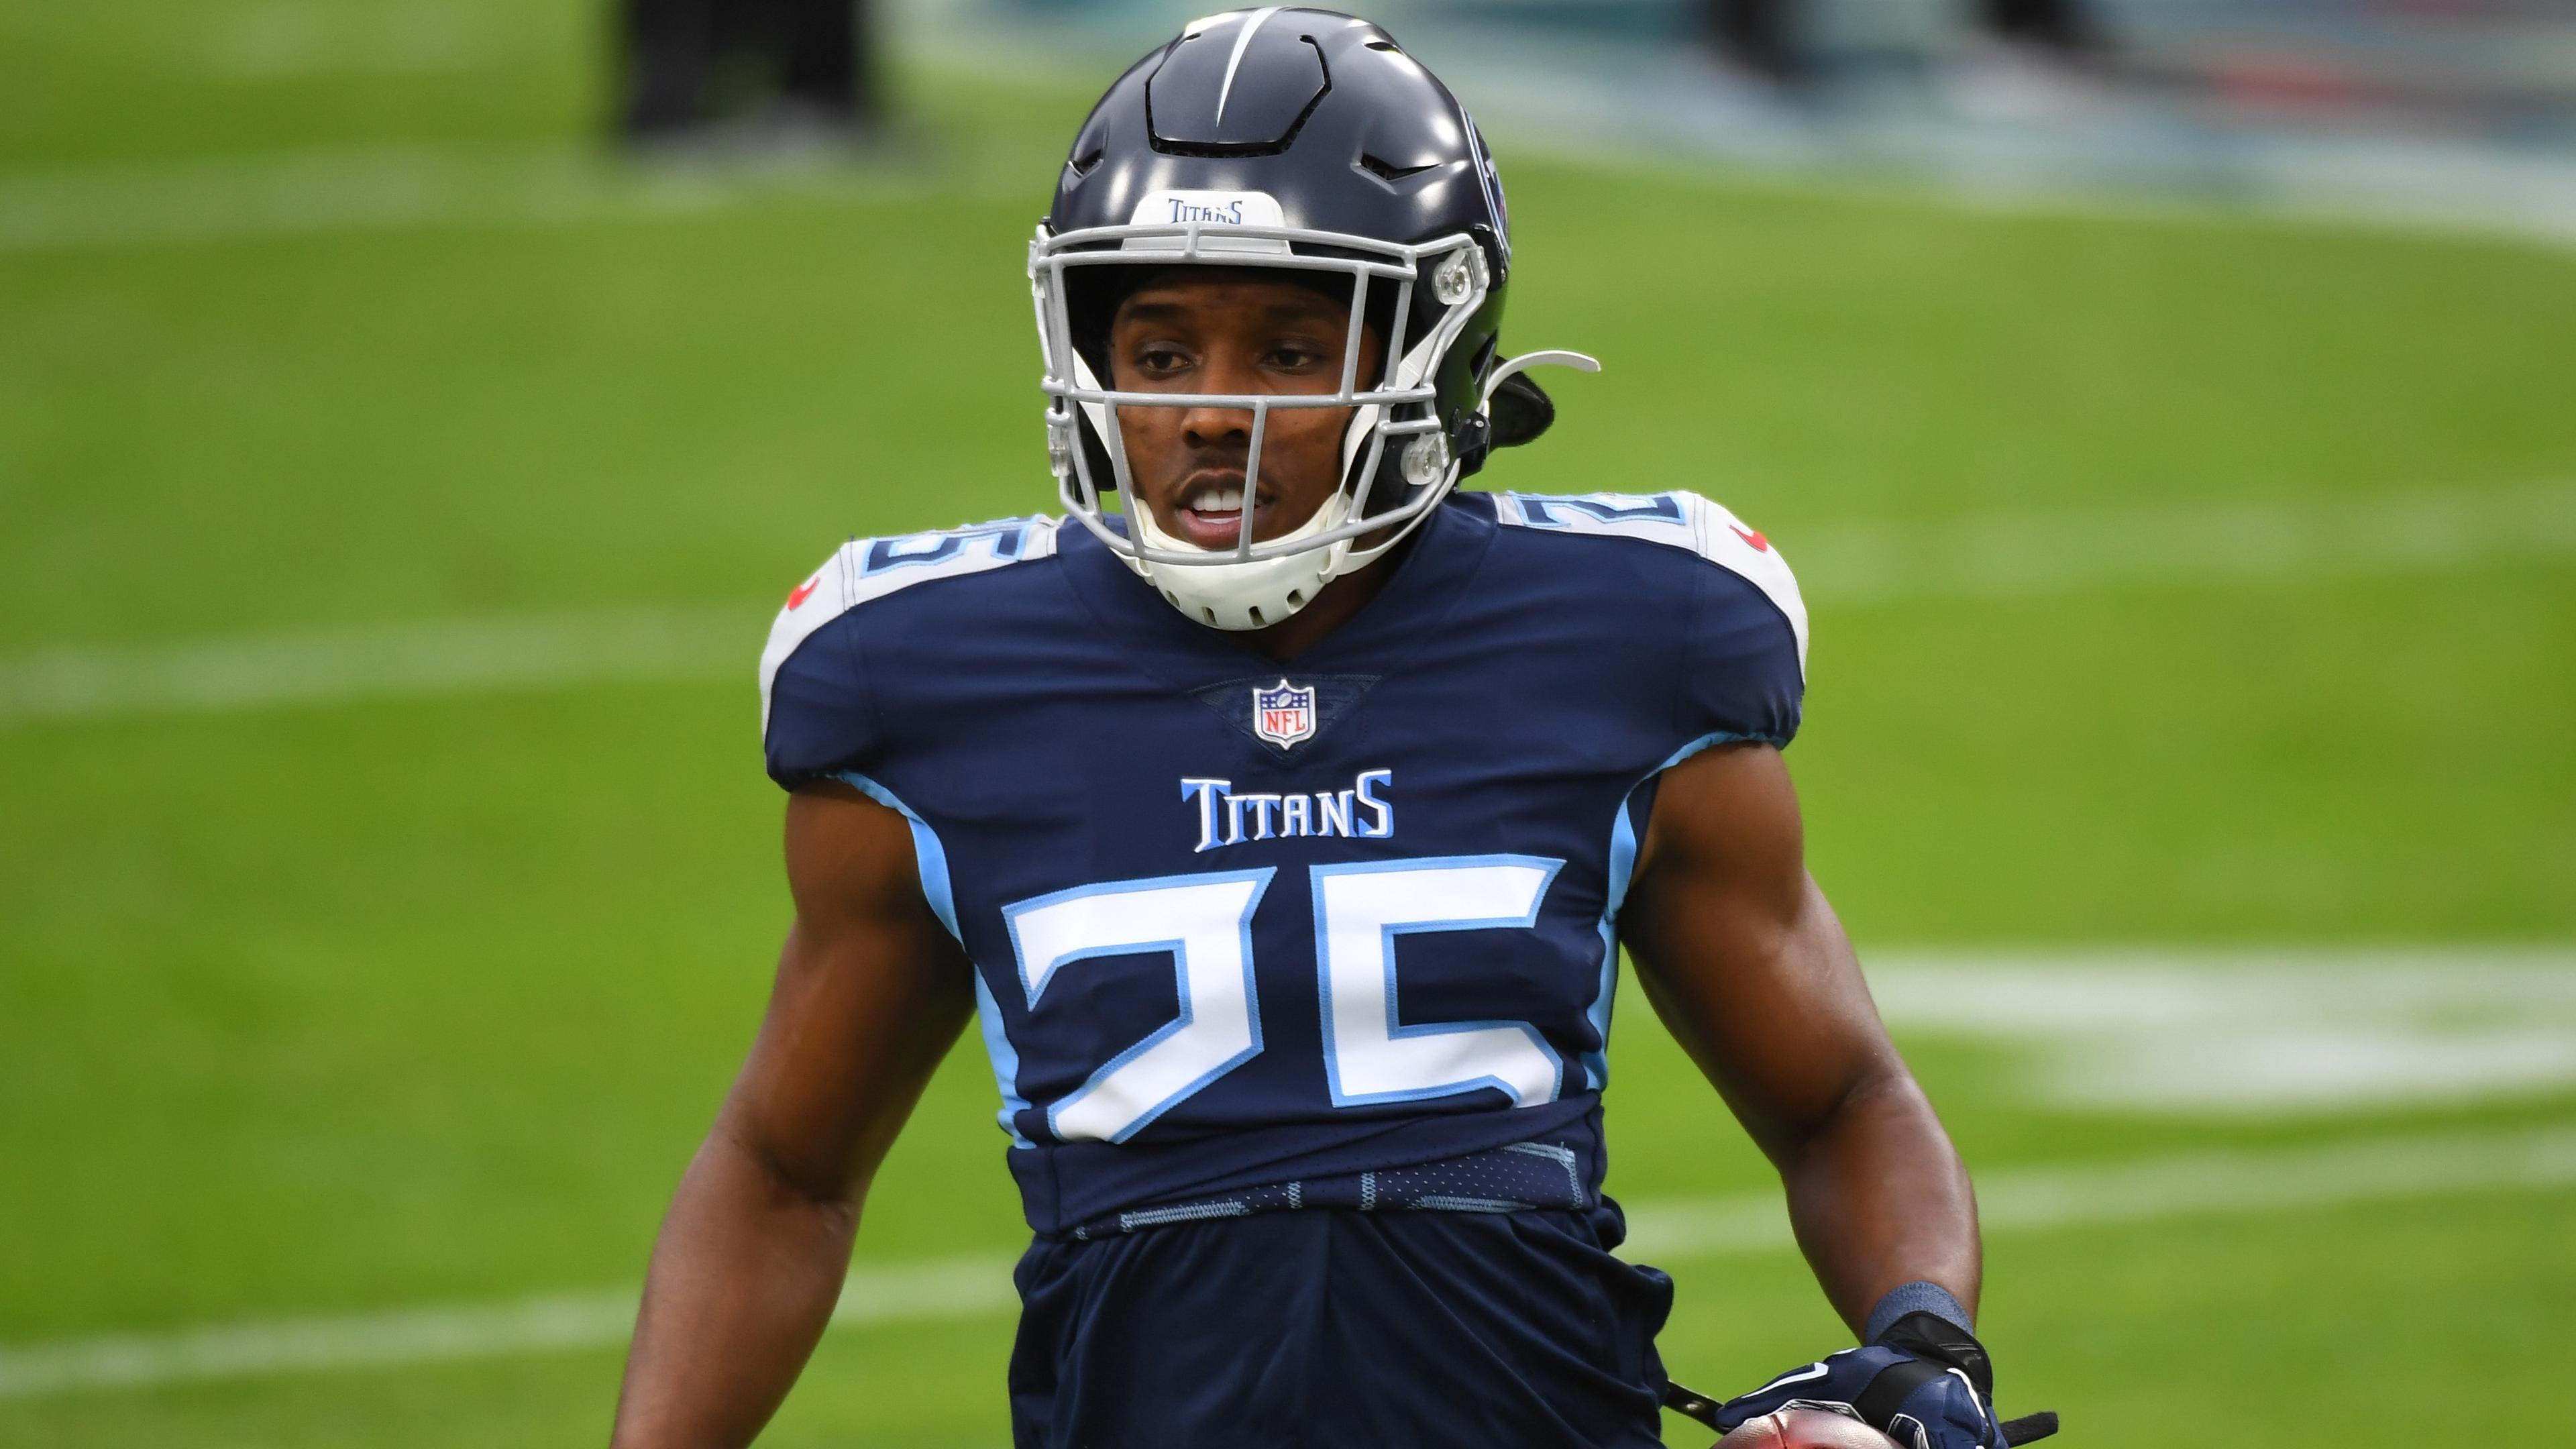 Dec 20, 2020; Nashville, Tennessee, USA; Tennessee Titans cornerback Adoree' Jackson (25) warms up before the game against the Detroit Lions at Nissan Stadium / Christopher Hanewinckel-USA TODAY Sports